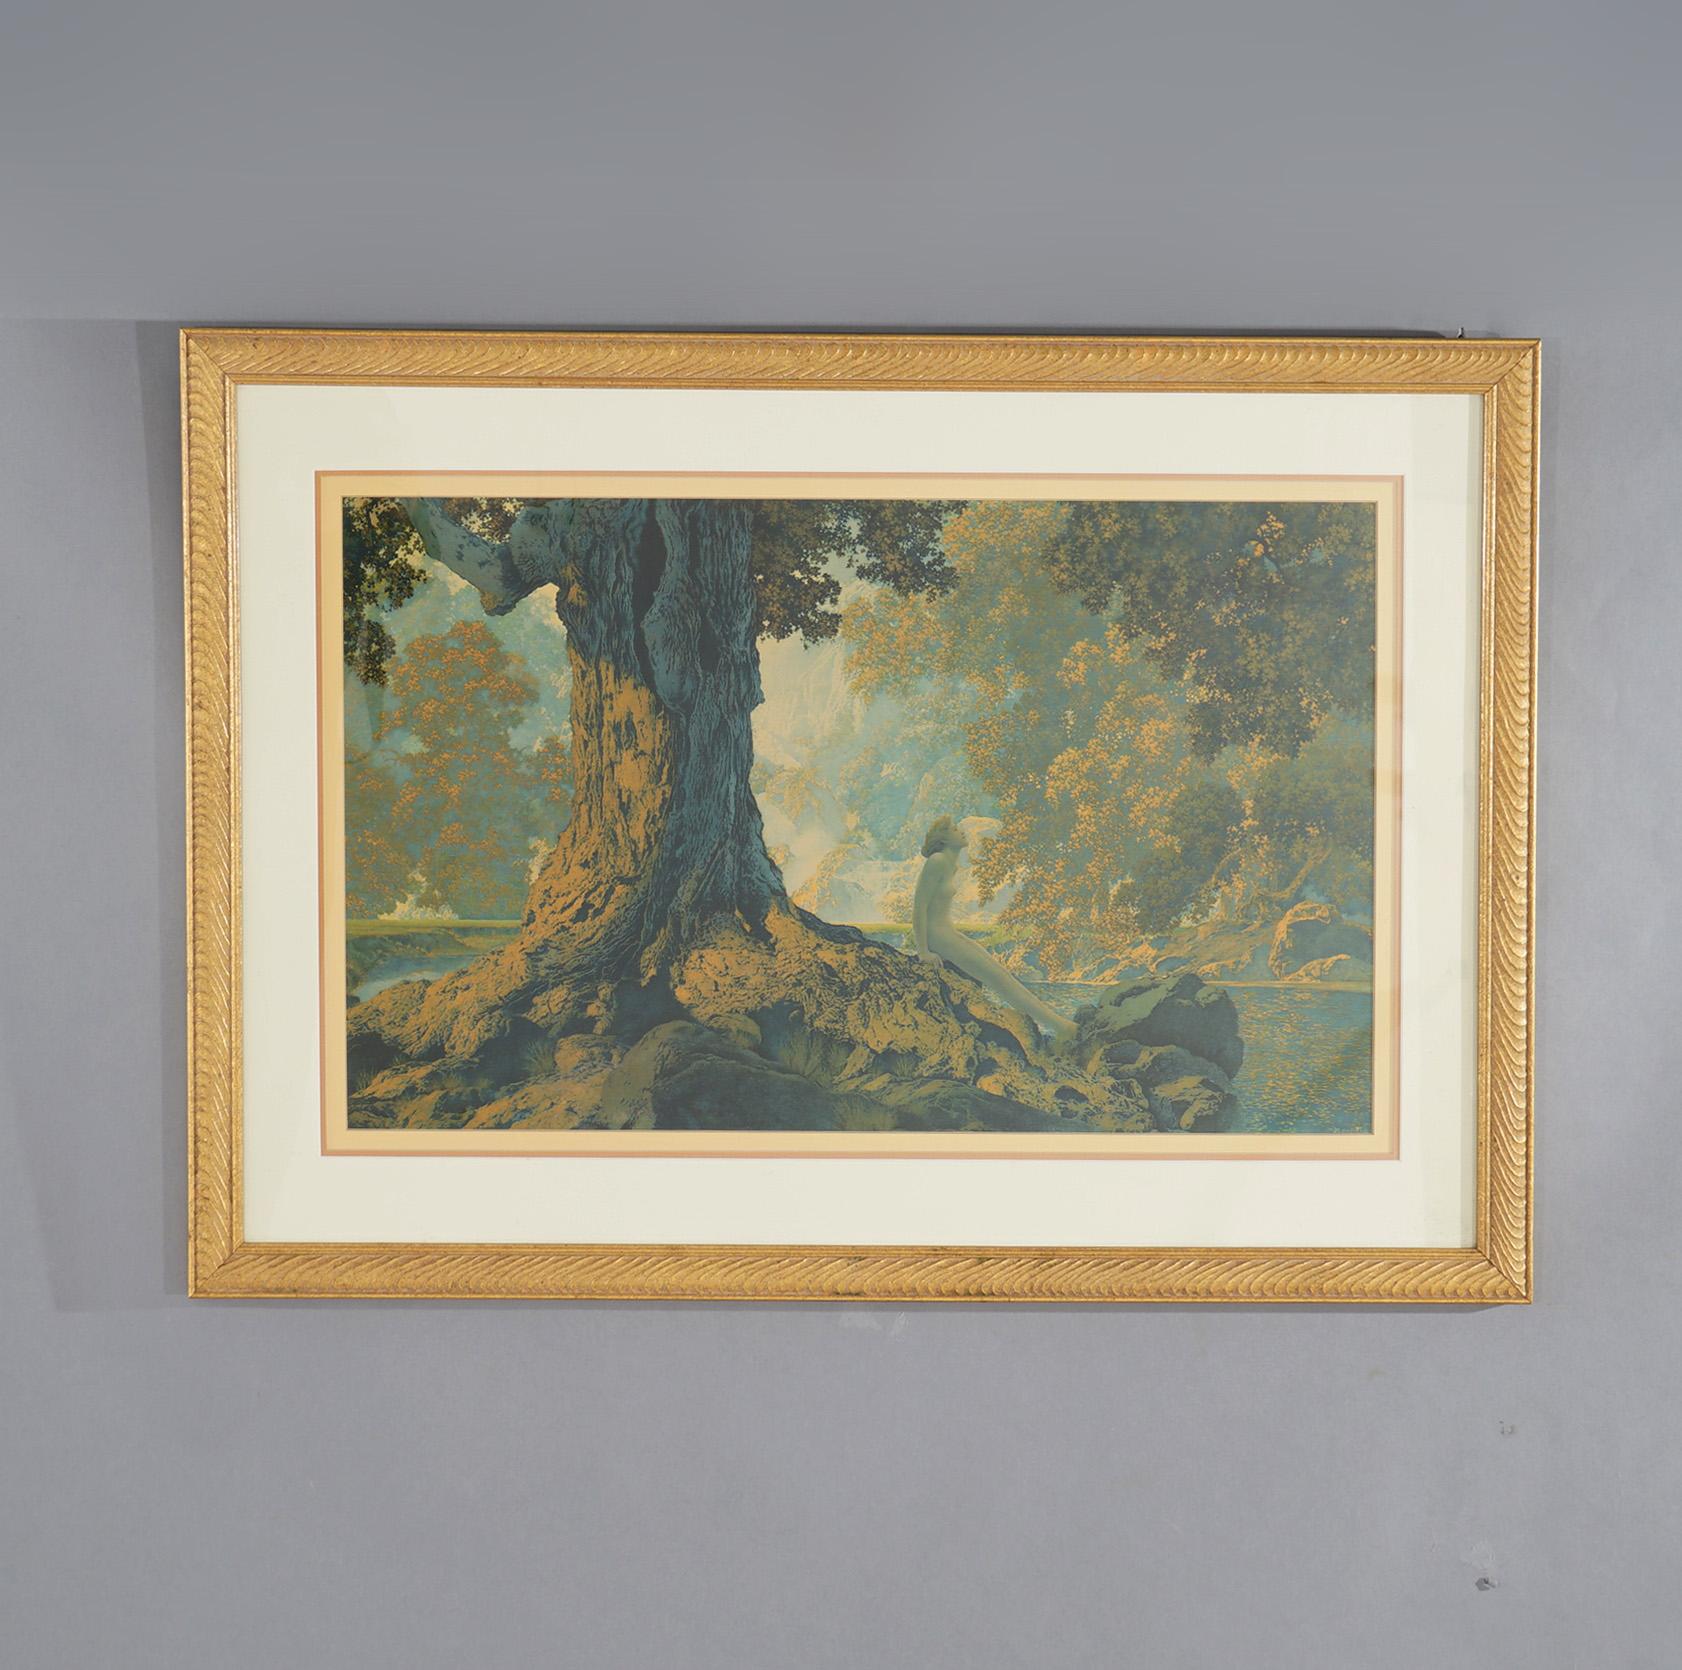 Maxfield Parrish Art Deco Dreaming Large Size Print, Framed, Circa 1920

Measures - 25